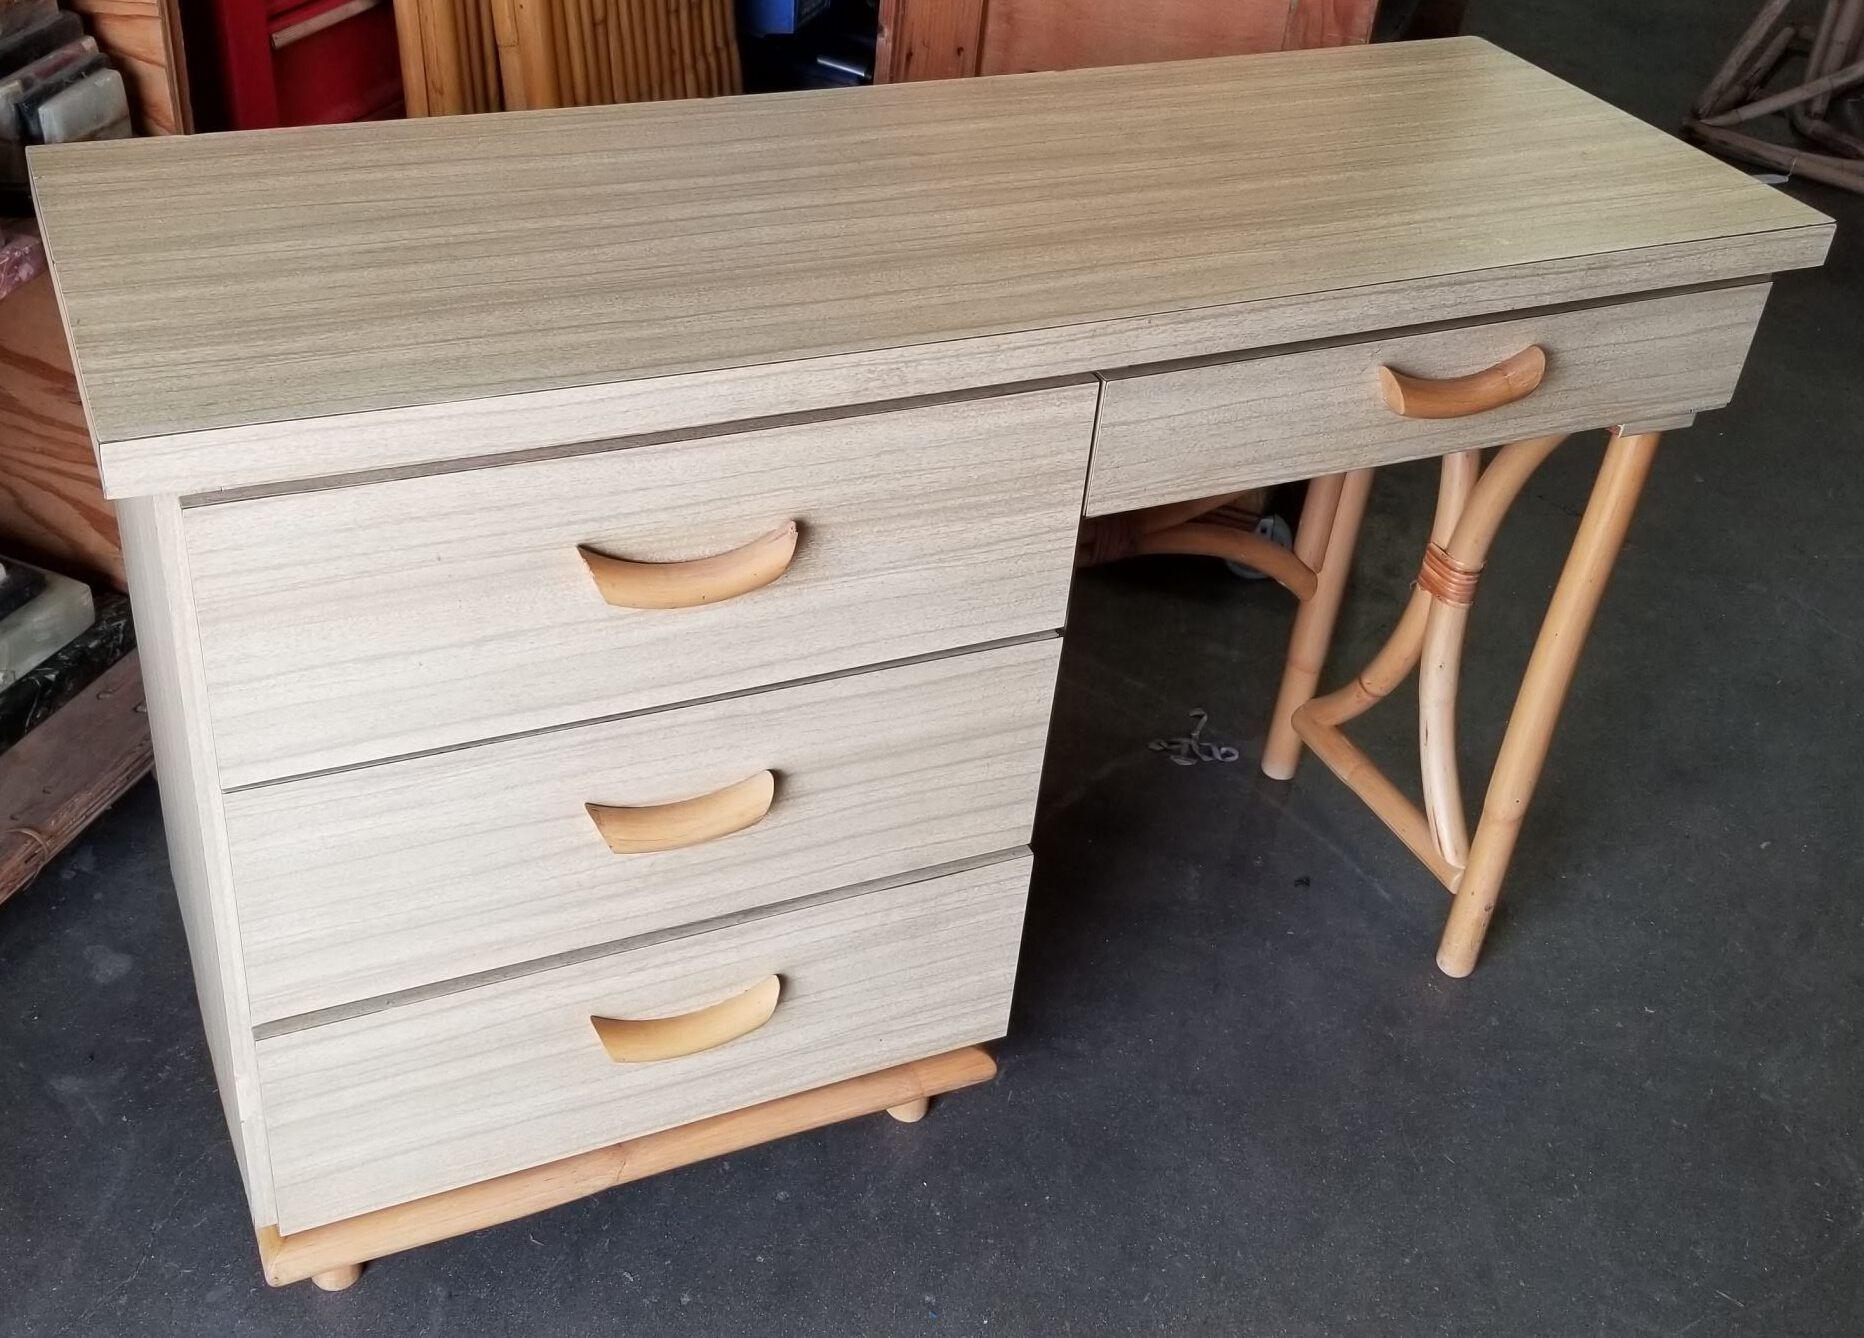 This restored mid-century desk showcases blonde Formica with drawers, enclosed in an hourglass-shaped rattan frame. It's unique design flaunts curved rattan drawer pulls, exuding a tropical vibe. With its blend of rattan and Formica, this piece